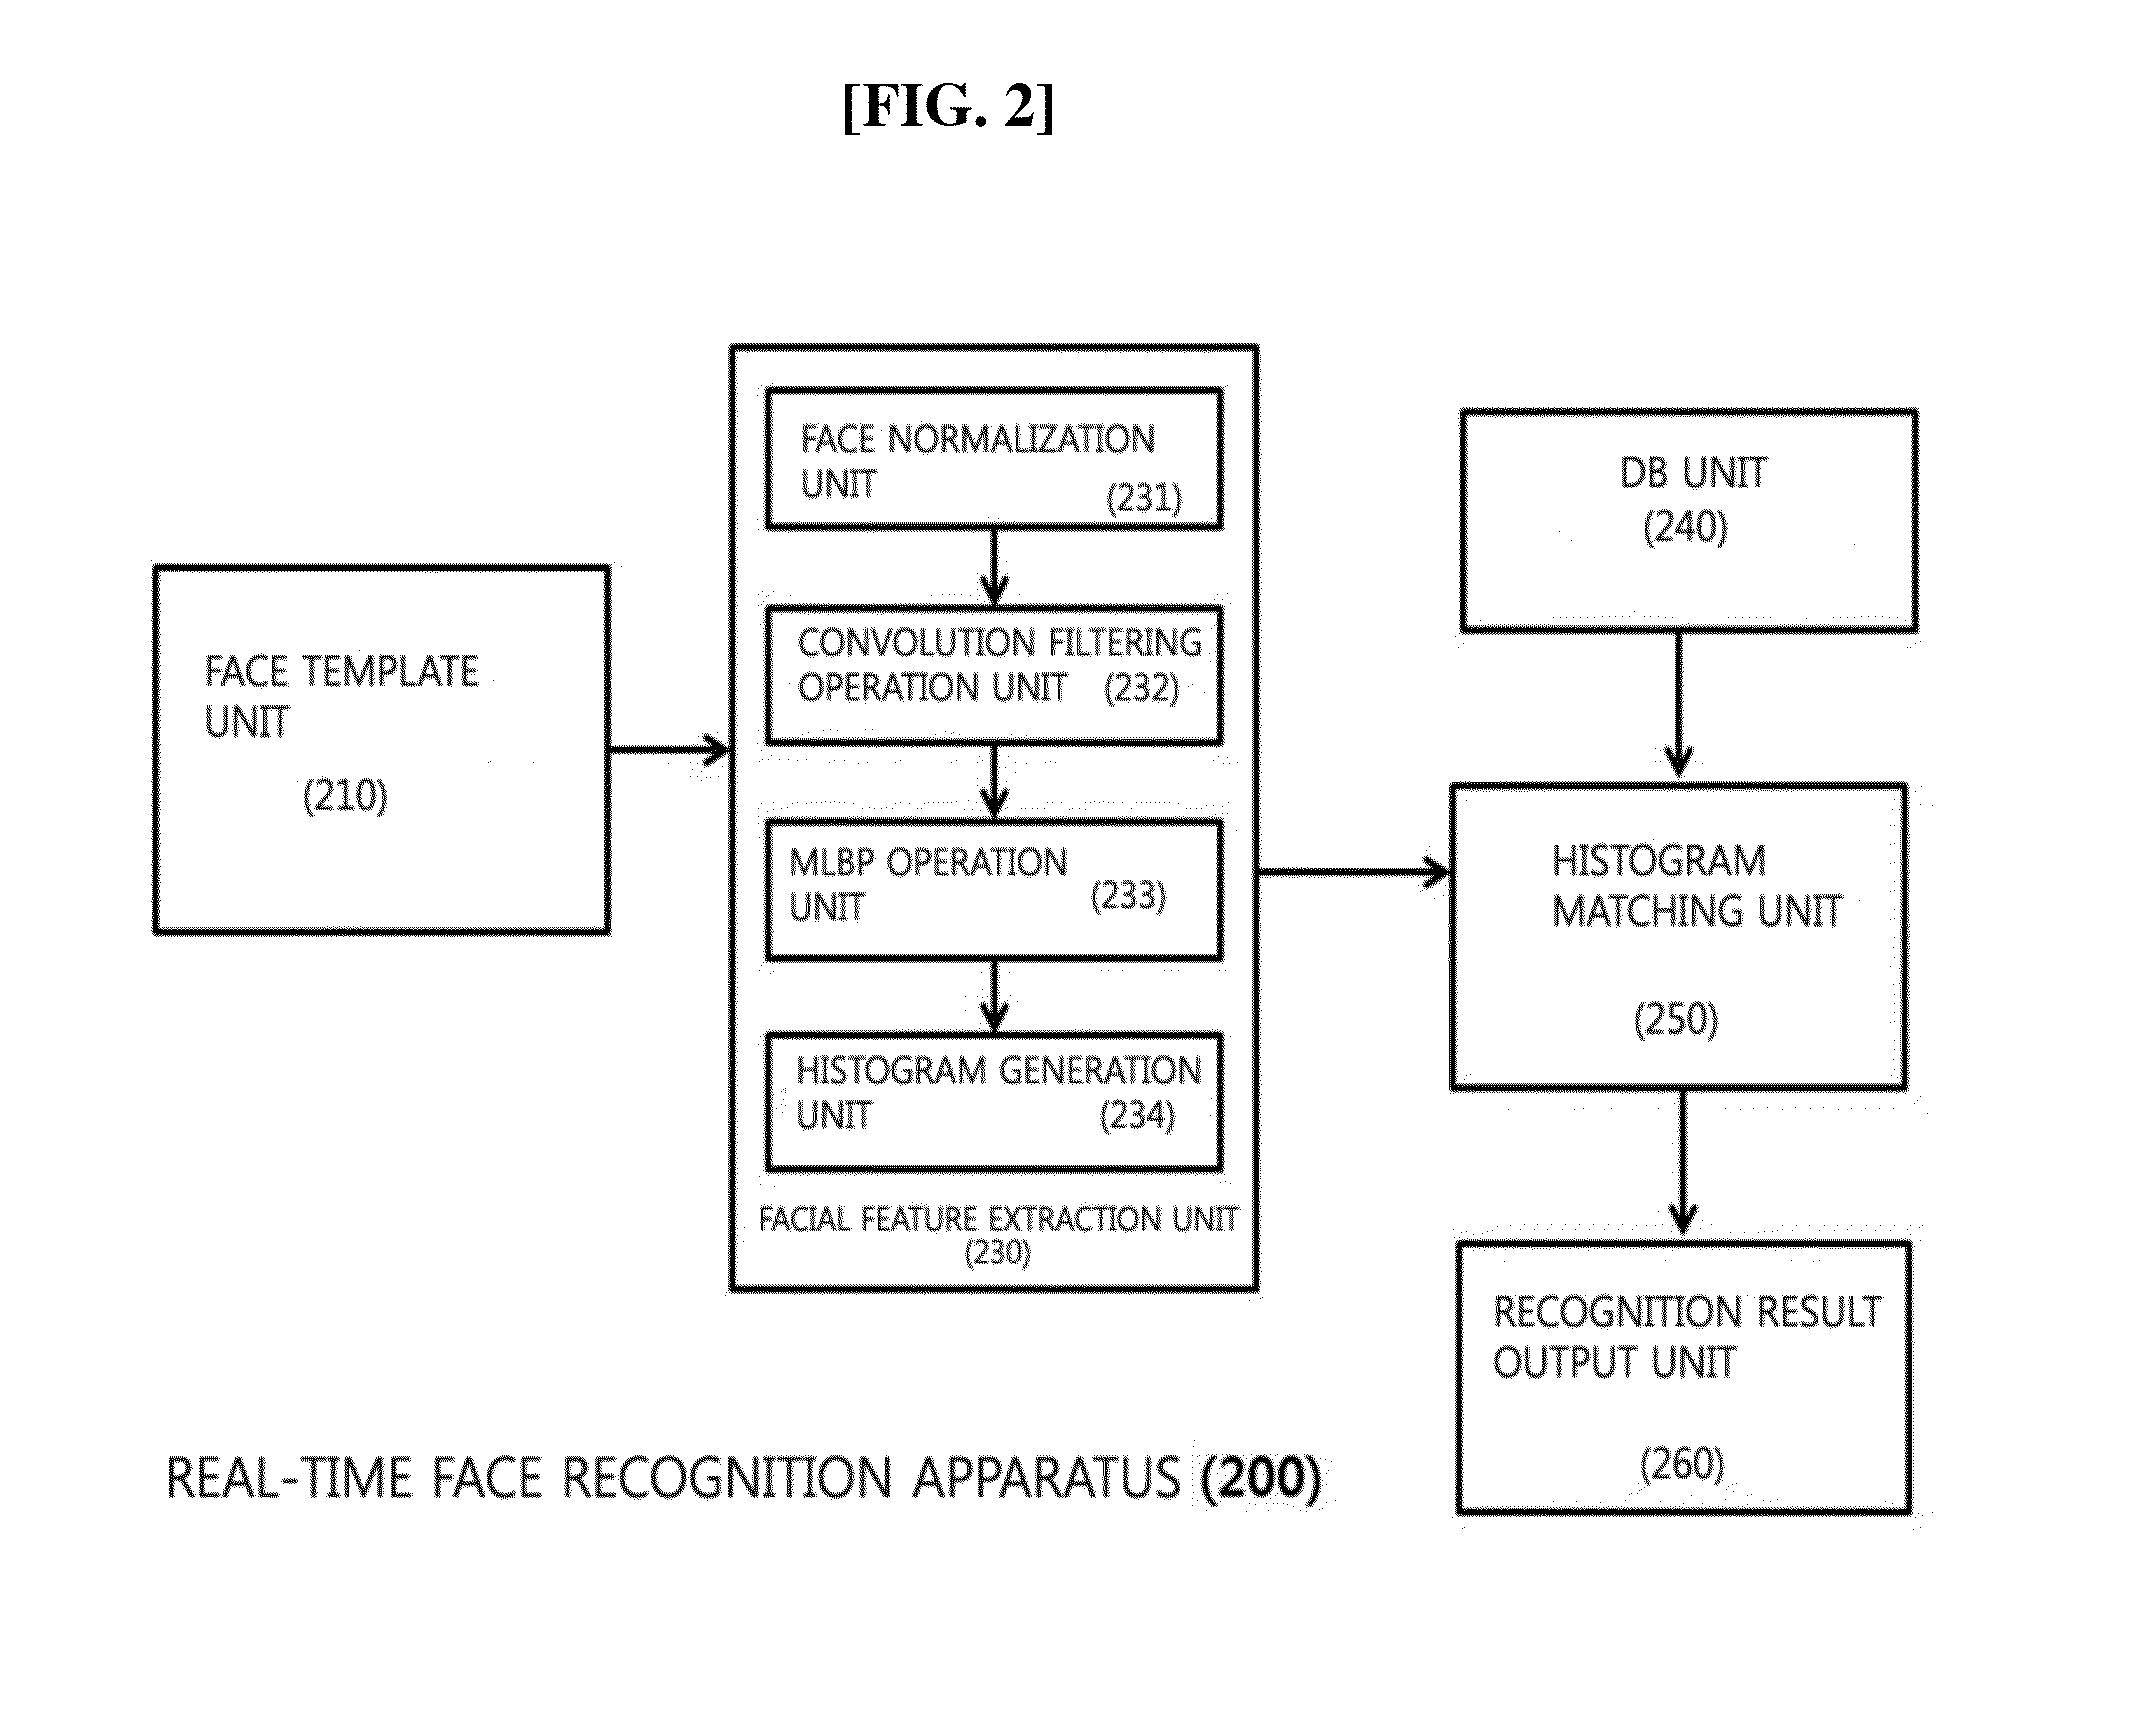 Apparatus for real-time face recognition